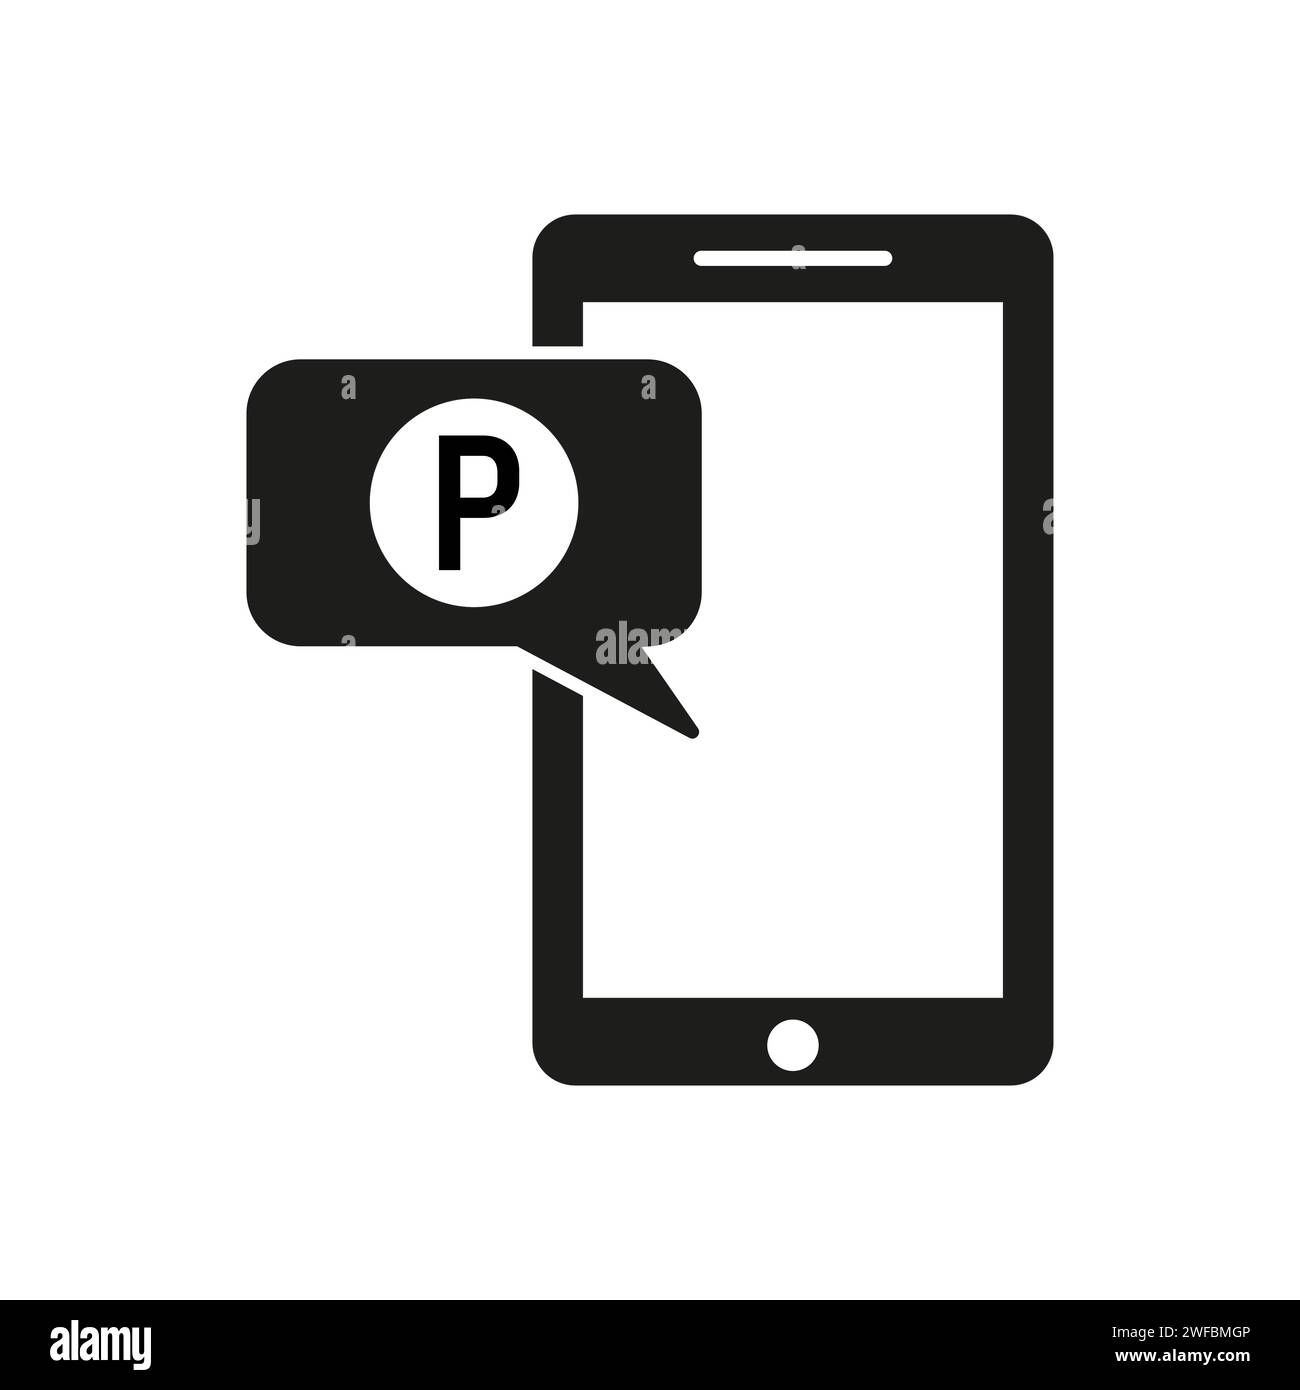 Phone parking bubble icon. Vector illustration. EPS 10. Stock image. Stock Vector